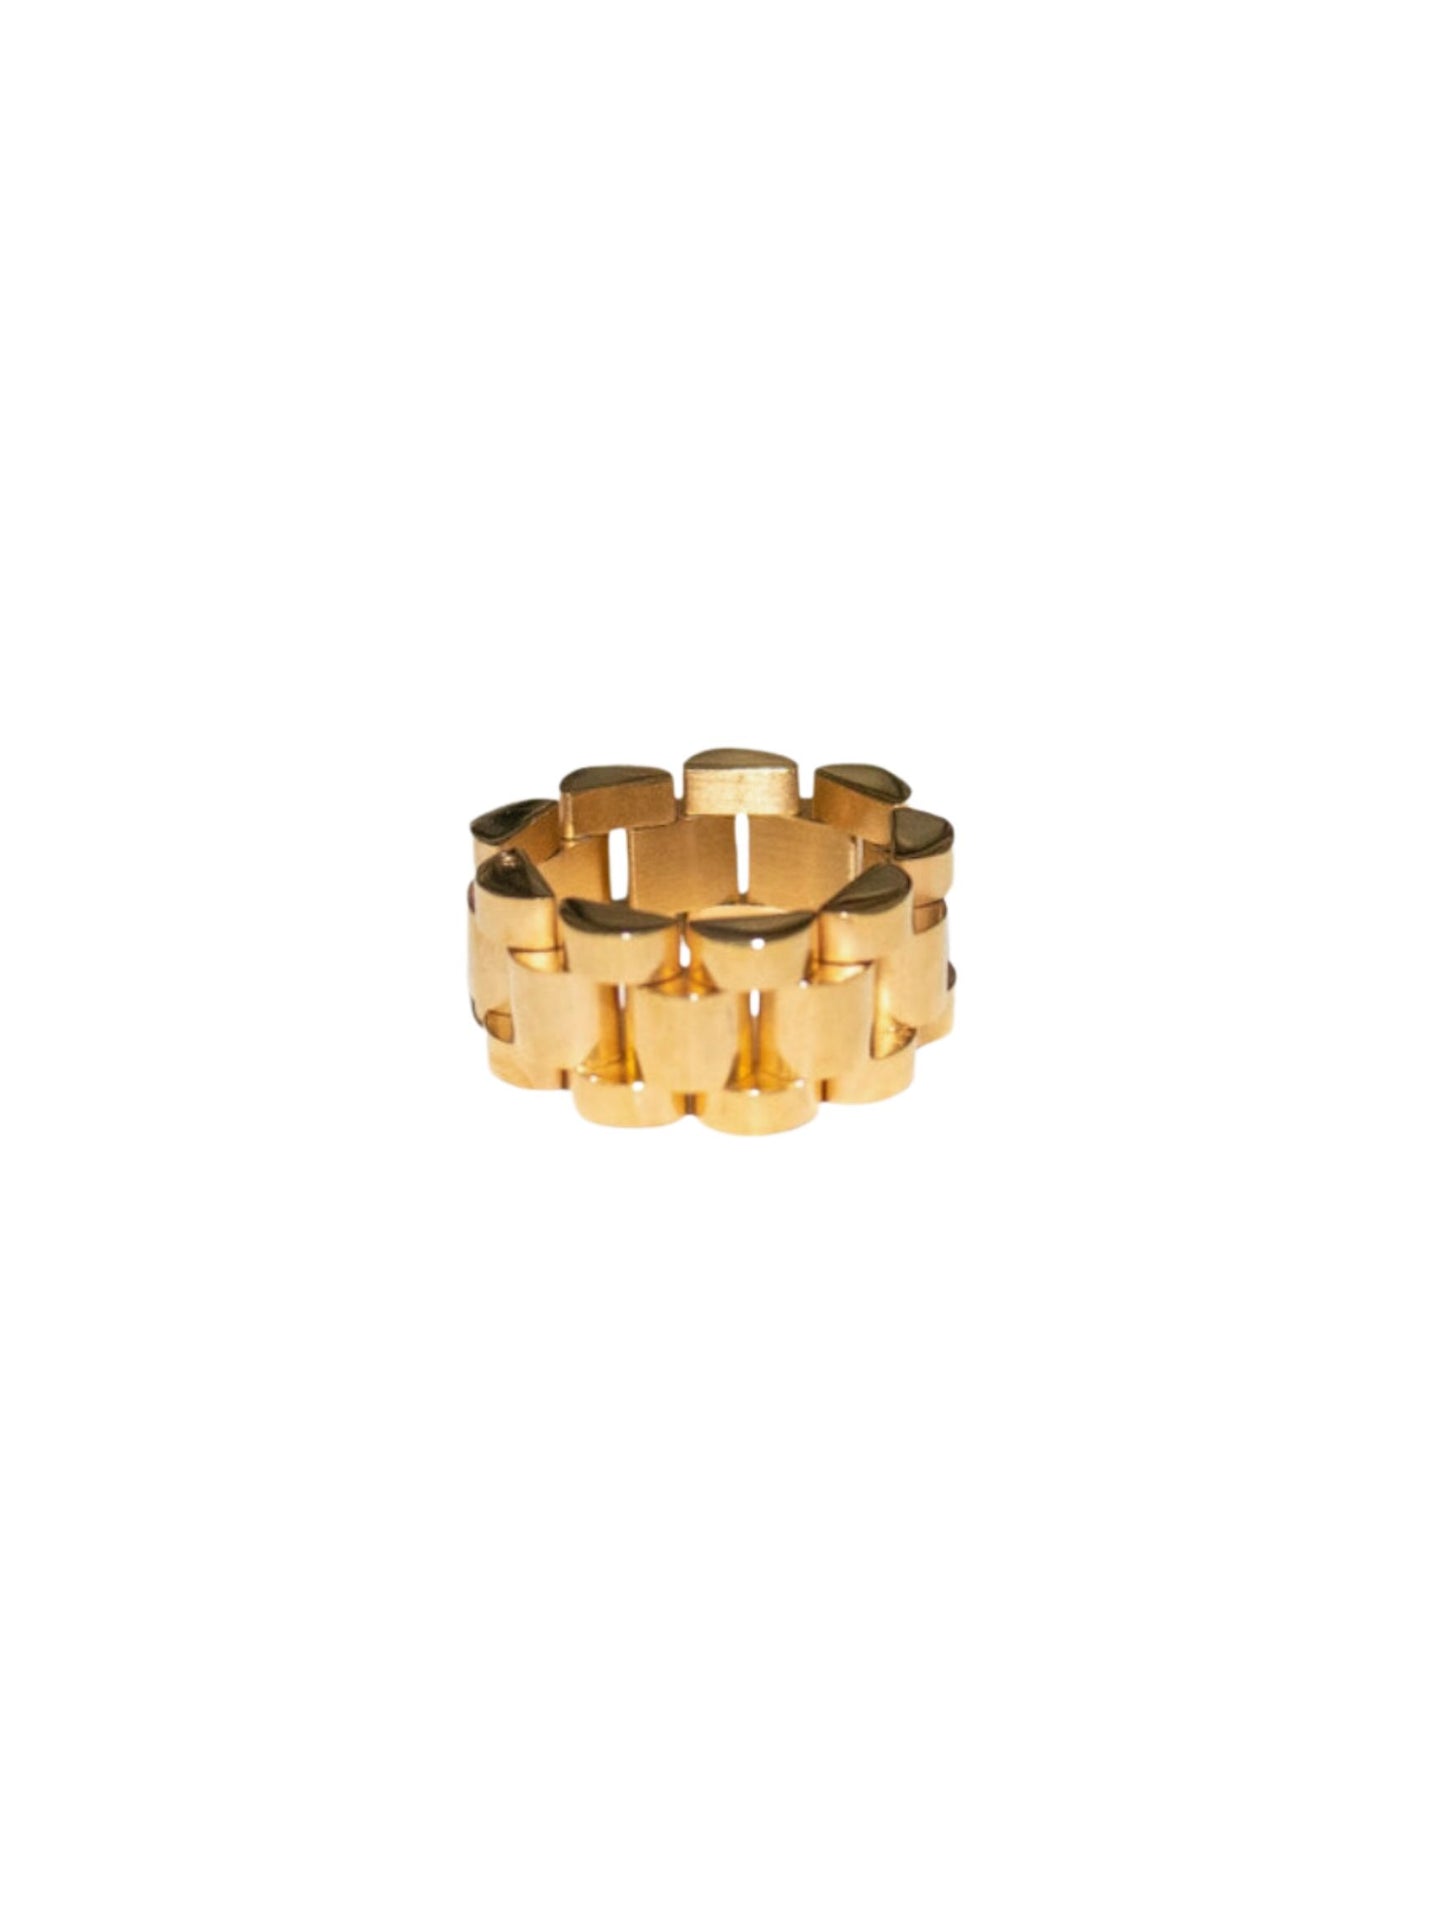 Watch Strap Ring - Gold